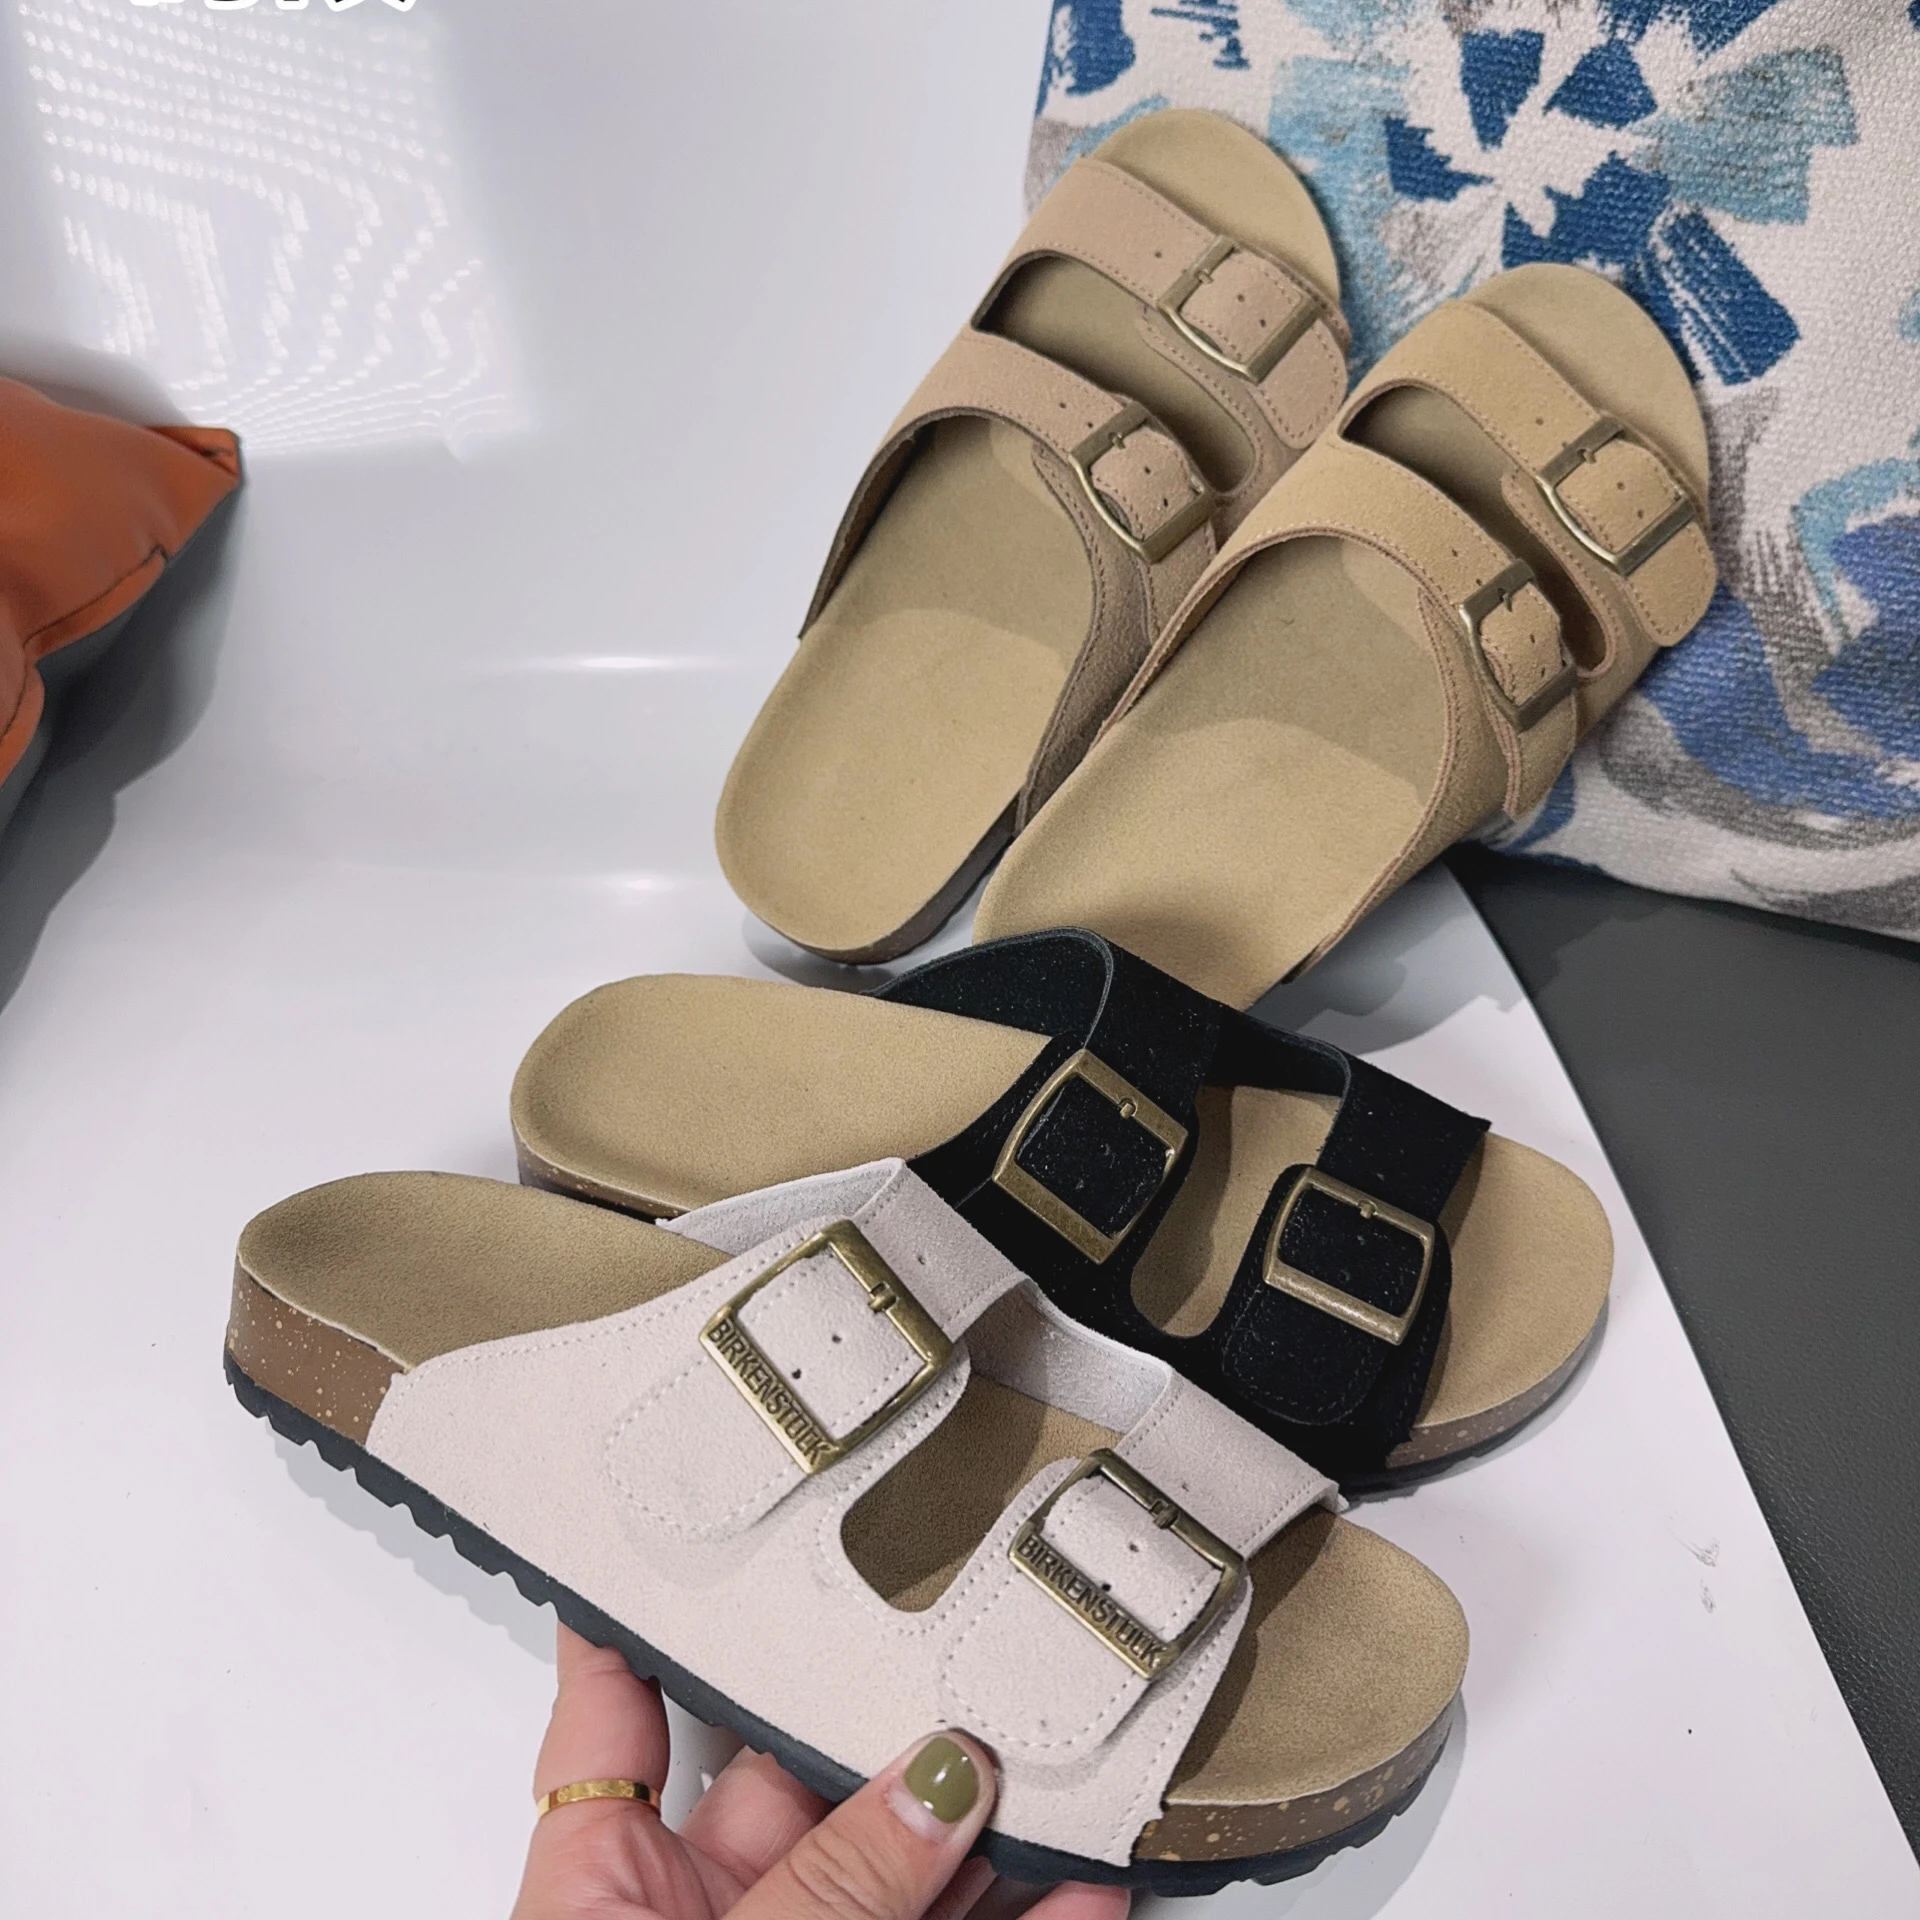 Birkenstocks and Mullerscasual shoes flats  light weight half shoes walking style  women shoes